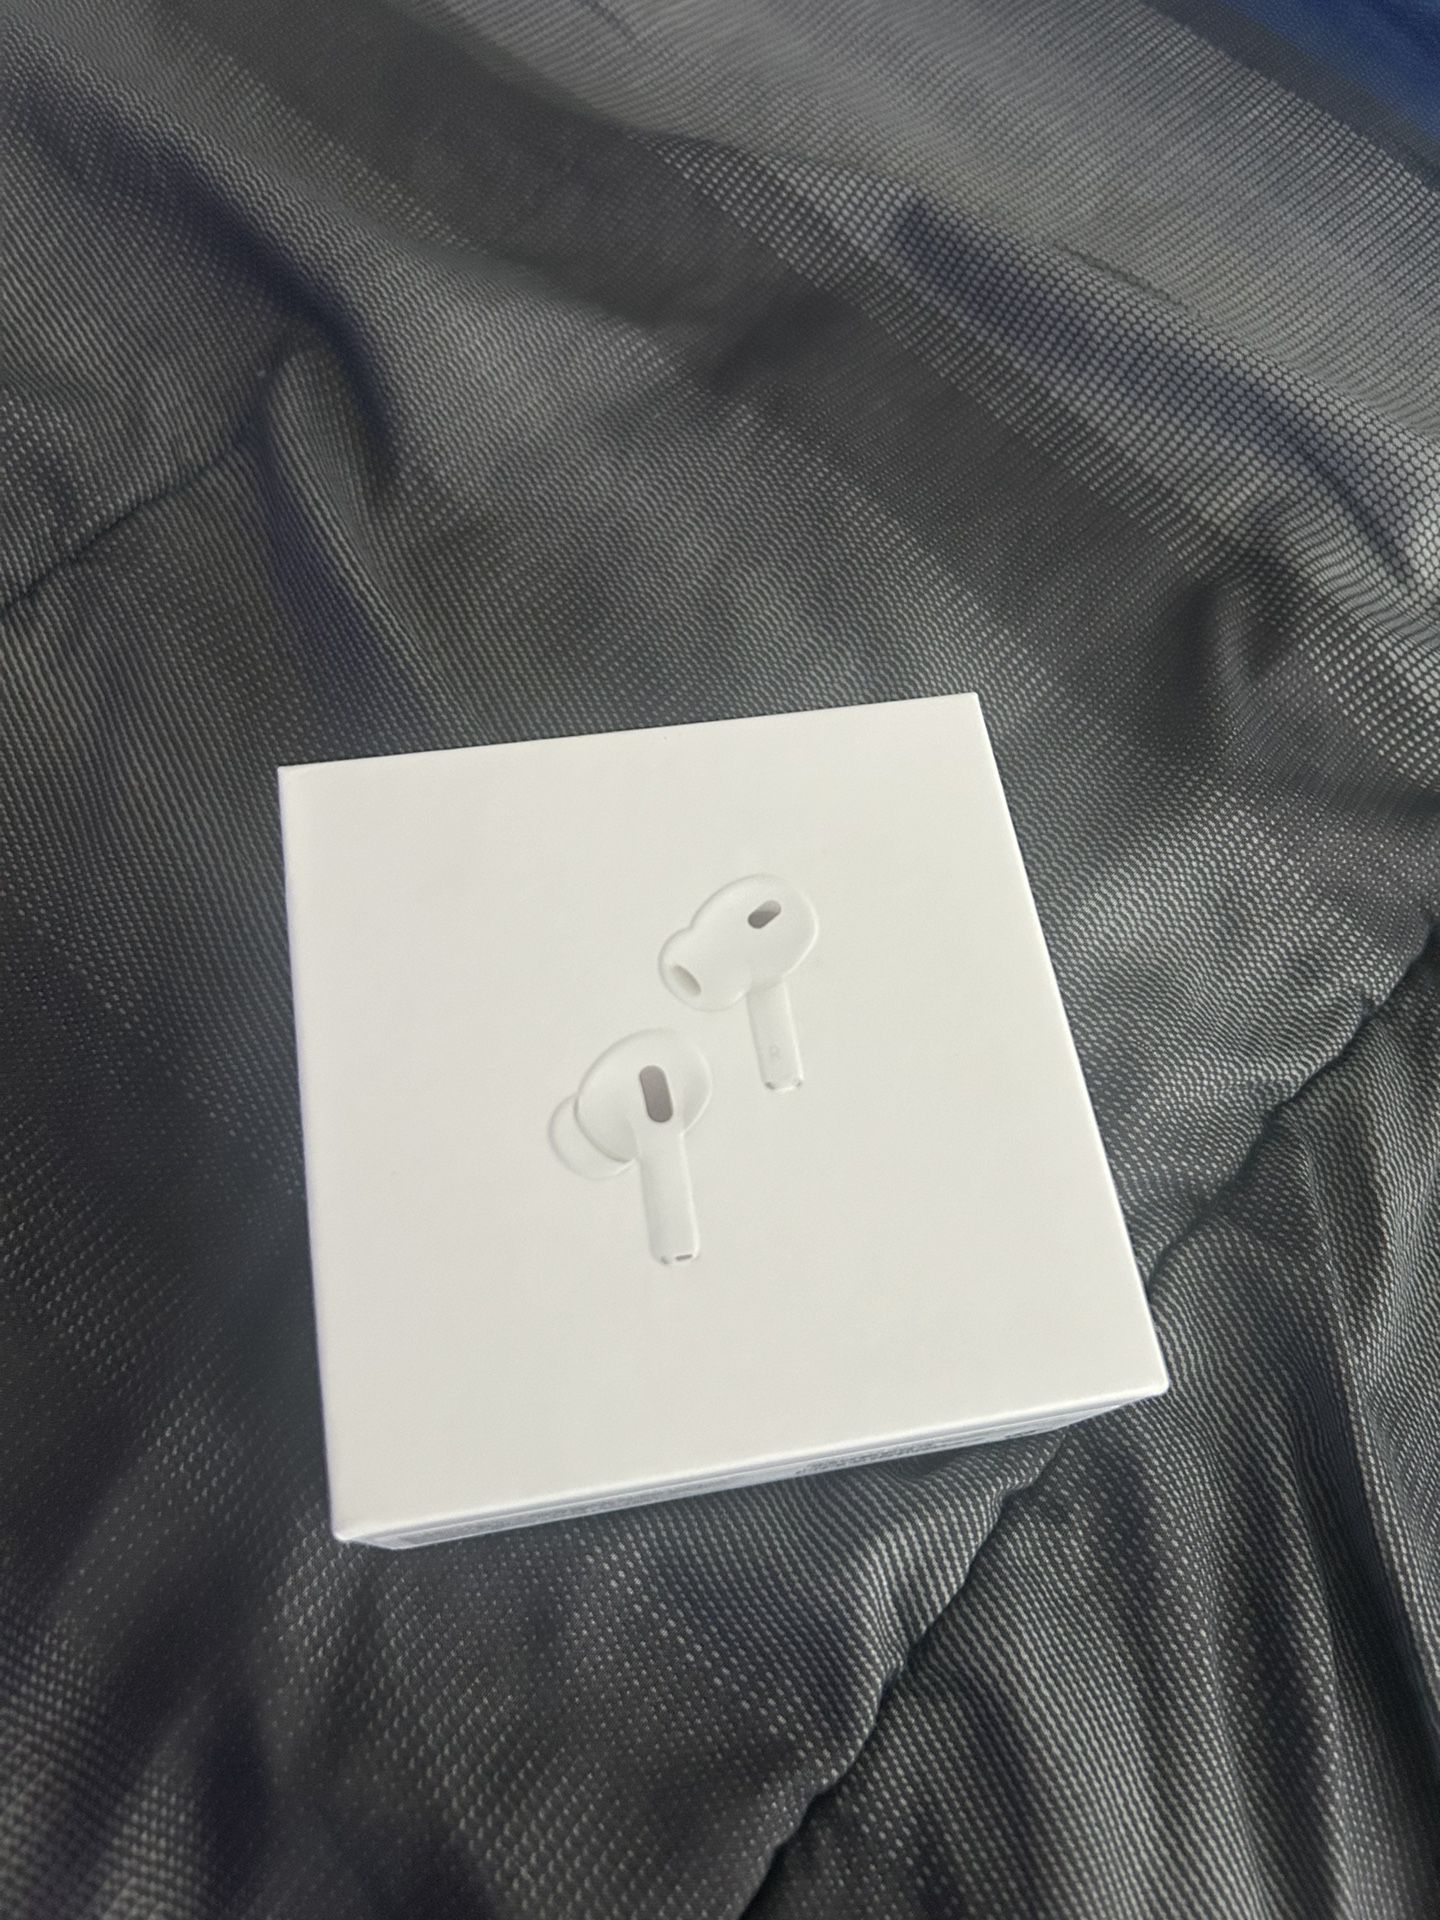 Airpod pros 2nd generation 